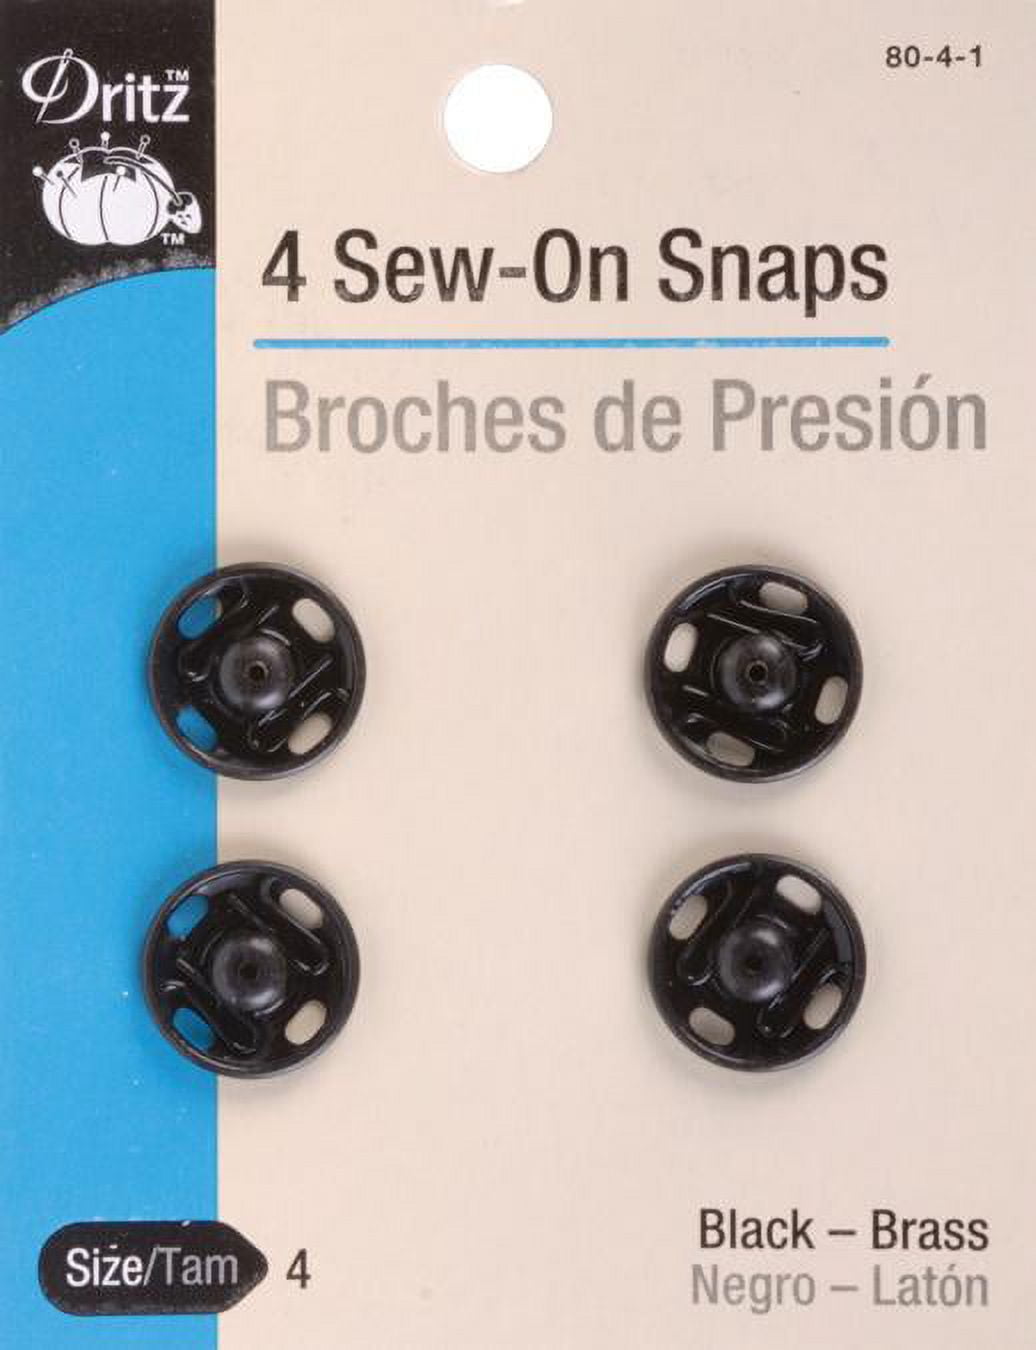 Dritz 12 Clear Sew-On Snaps - 1/4